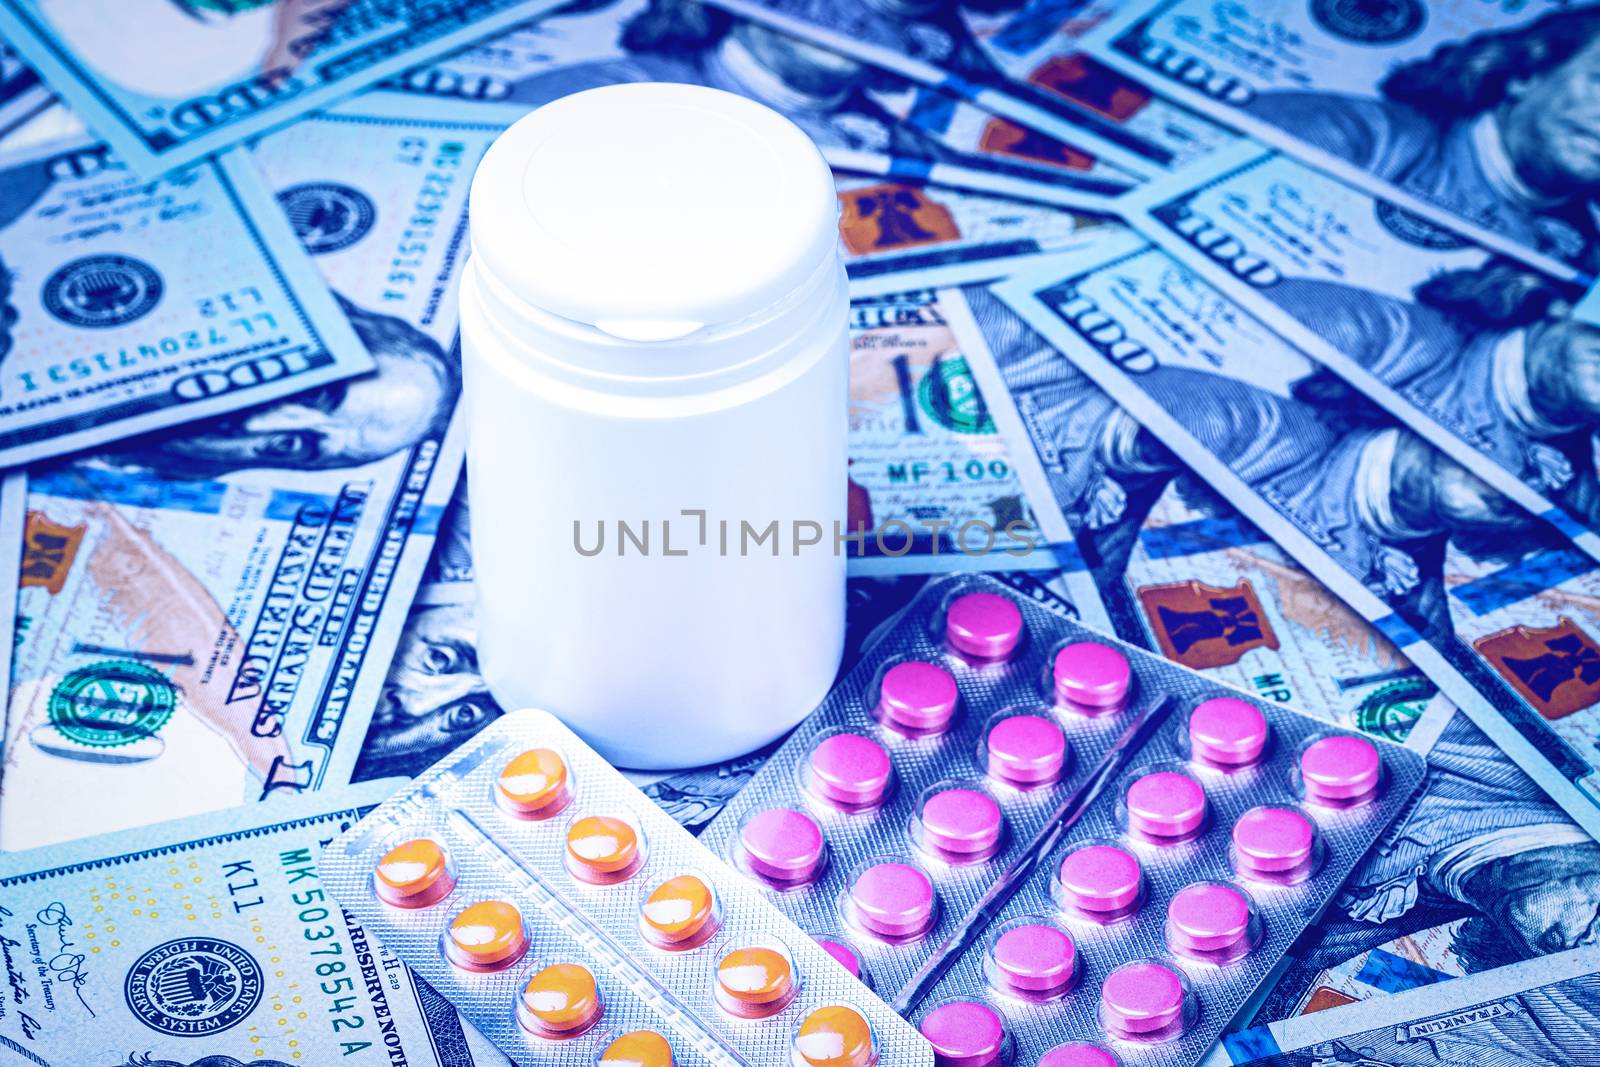 Plate with pills in the shape of a heart on the background of hundred-dollar bills. The concept of the expensive cost of healthcare or financing medicine. White medicine bottle with copy space for text.